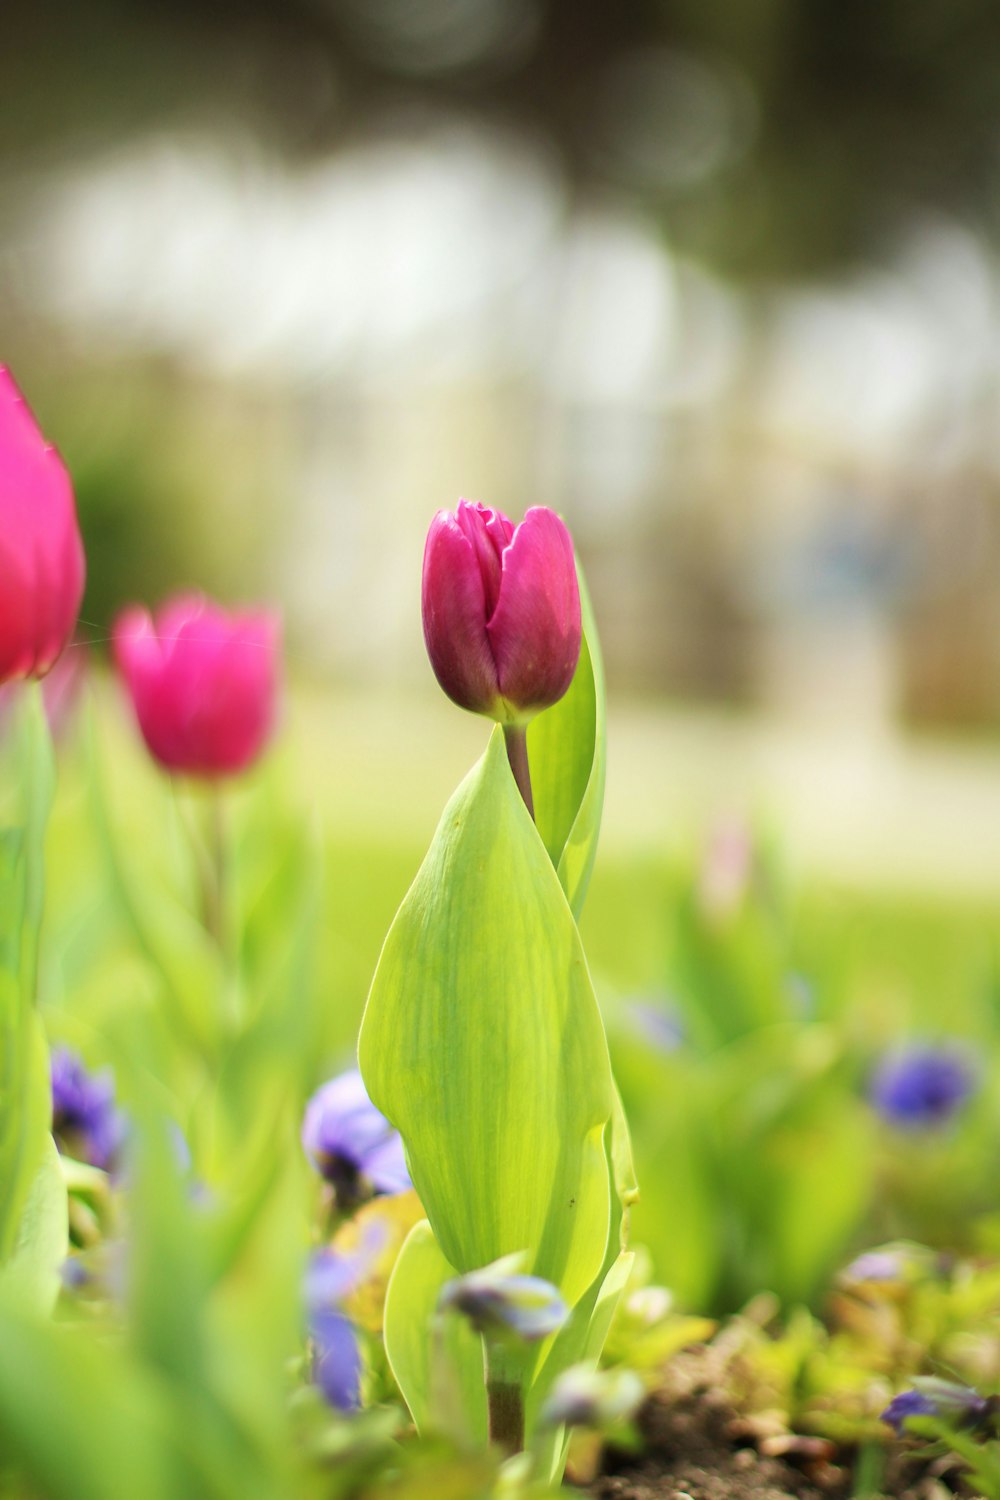 pink tulips and other flowers in a garden